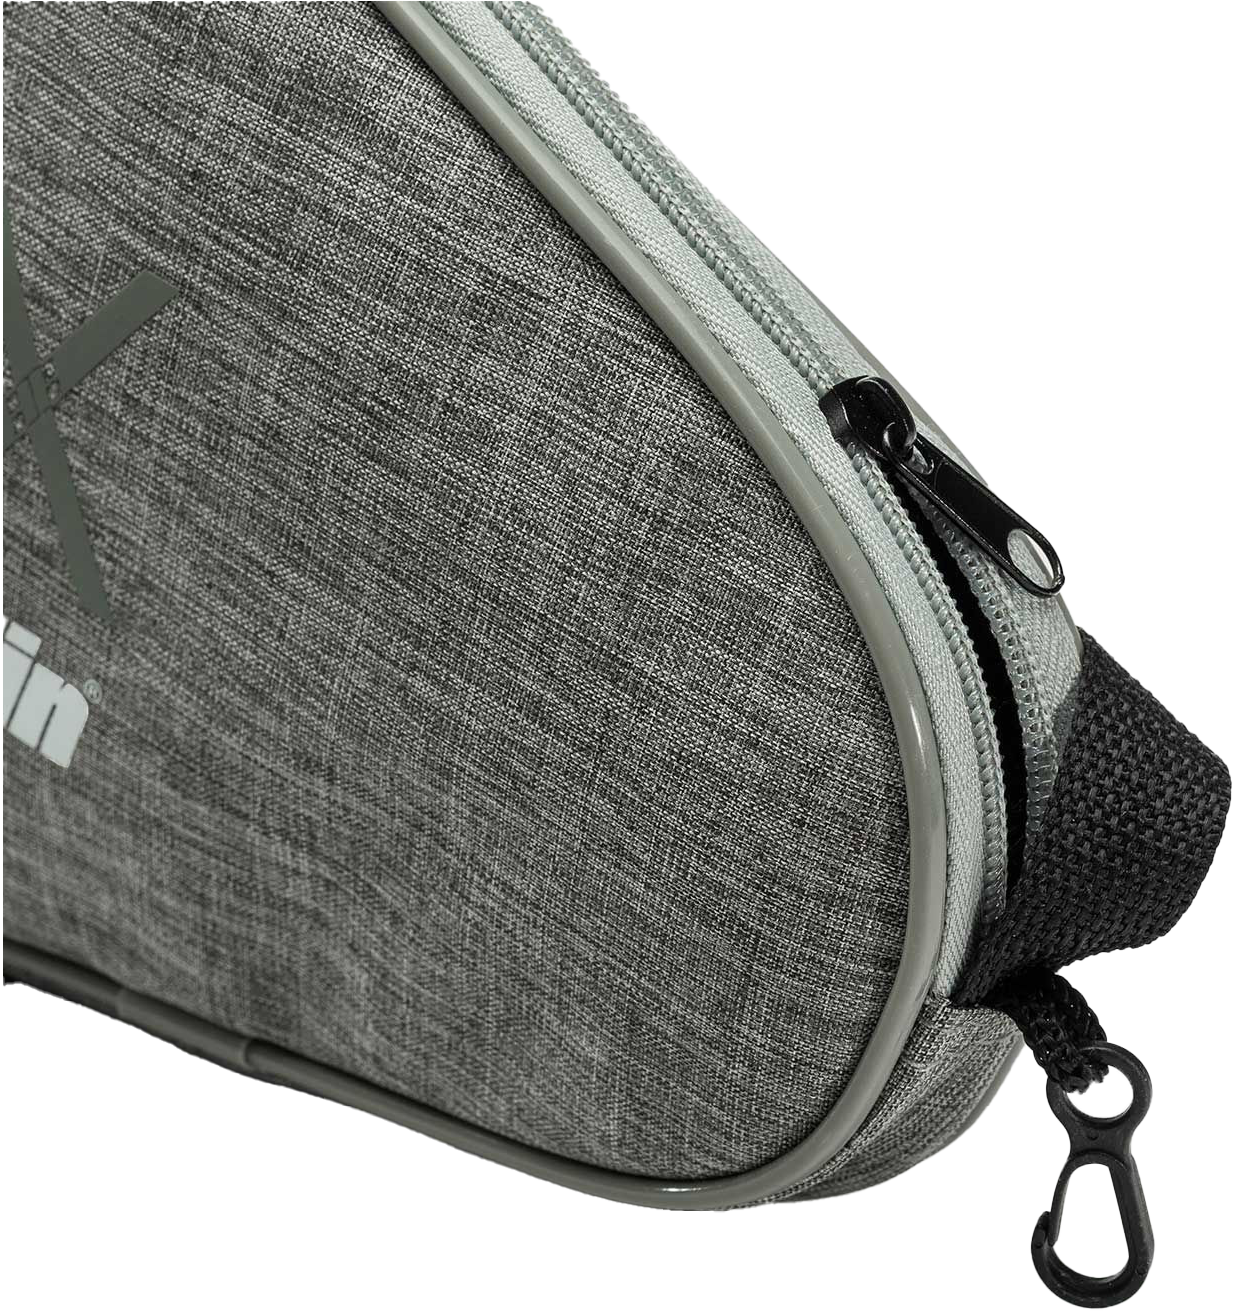 A Franklin Pickleball Paddle Bag with a convenient carry strap and zipper.